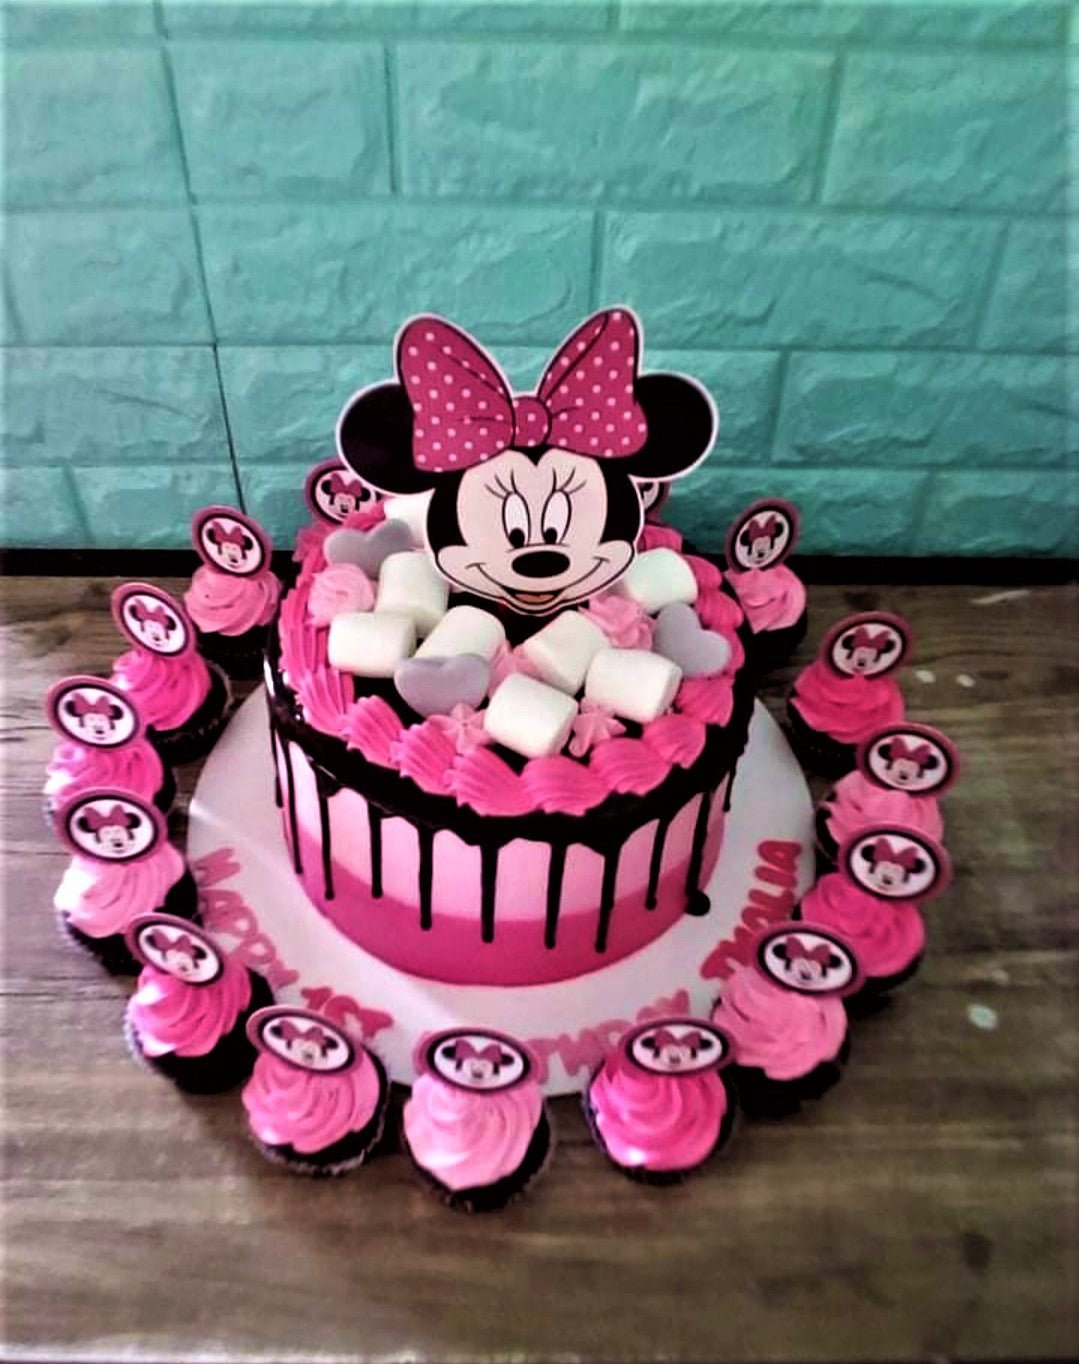 Minnie mouse first birthday cake | Minnie mouse birthday cakes, Small  birthday cakes, Minnie mouse first birthday